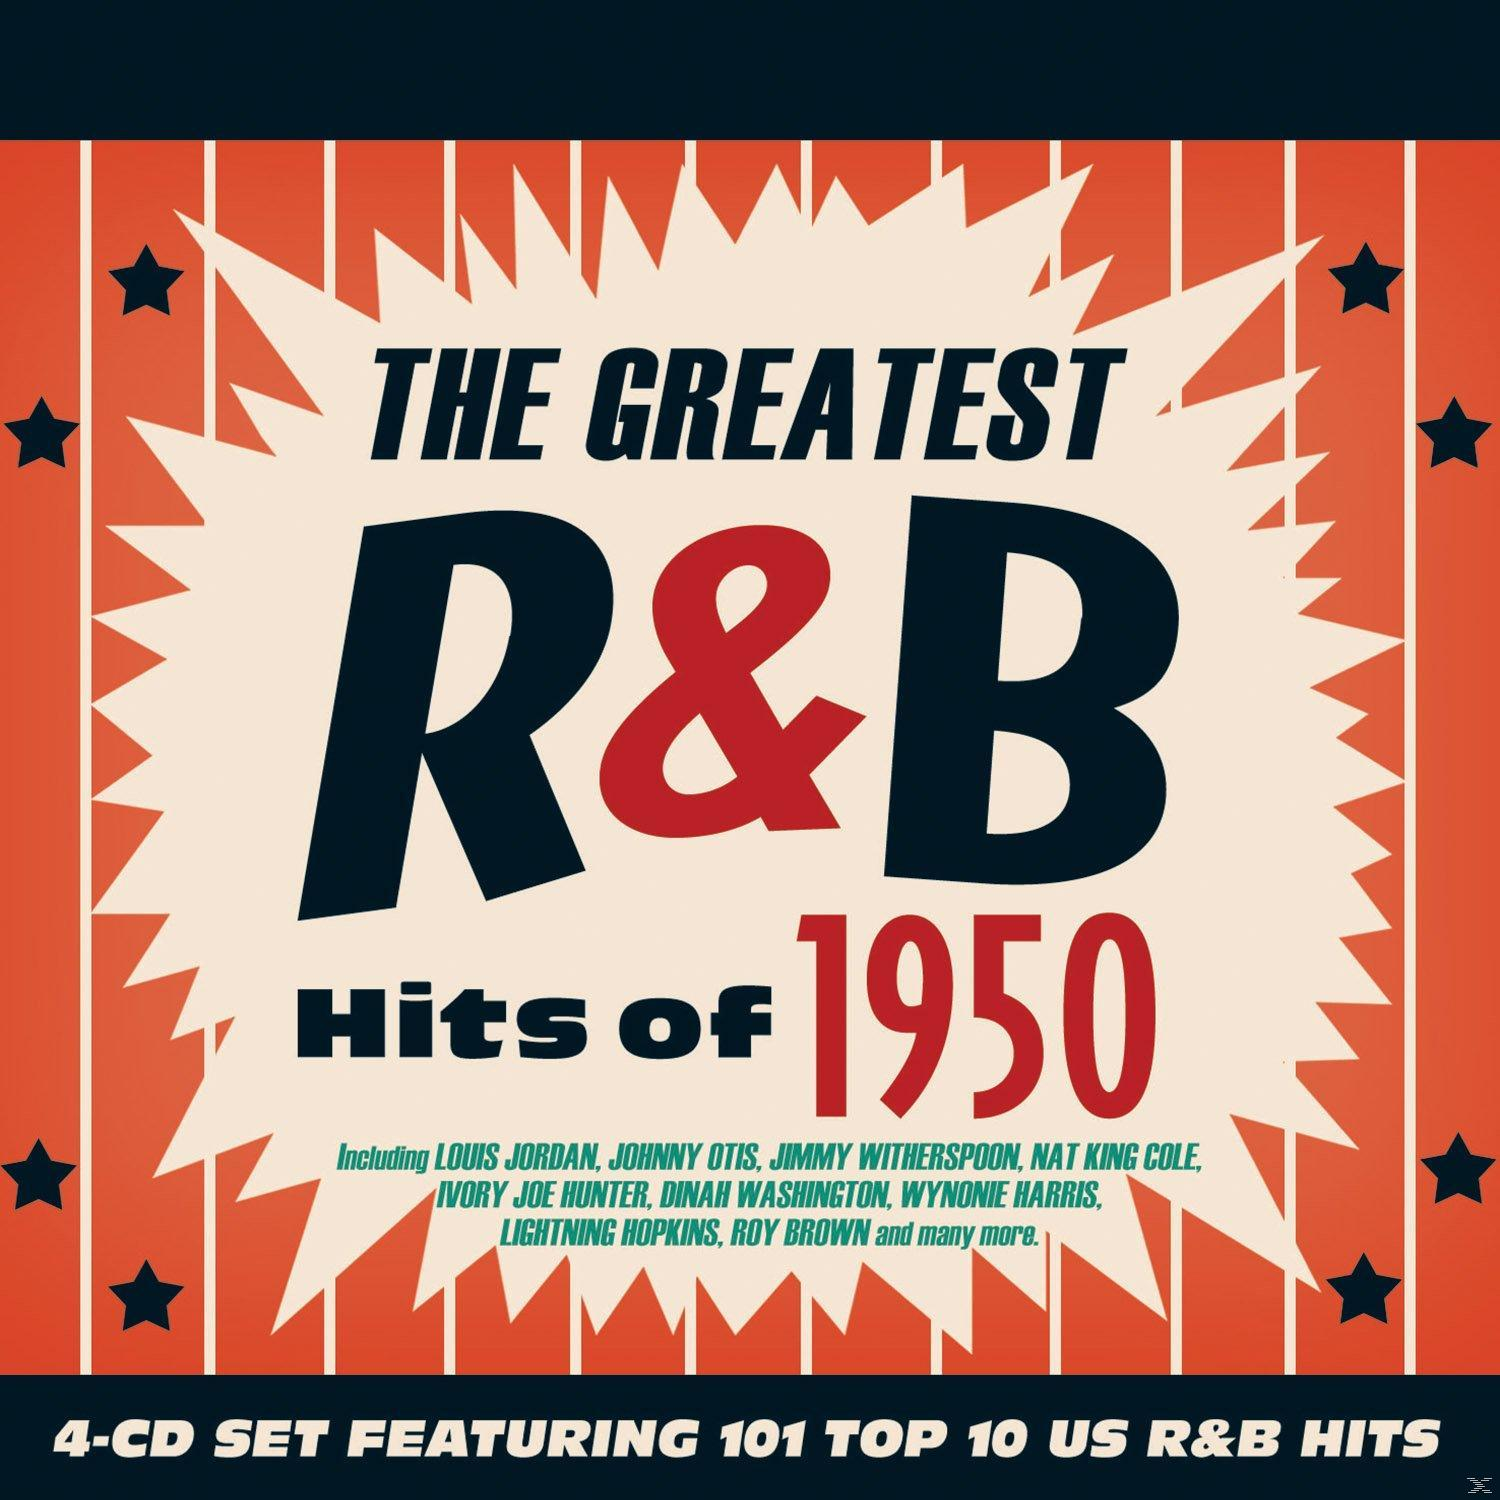 The Greatest 1950 - R&B Of VARIOUS - Hits (CD)